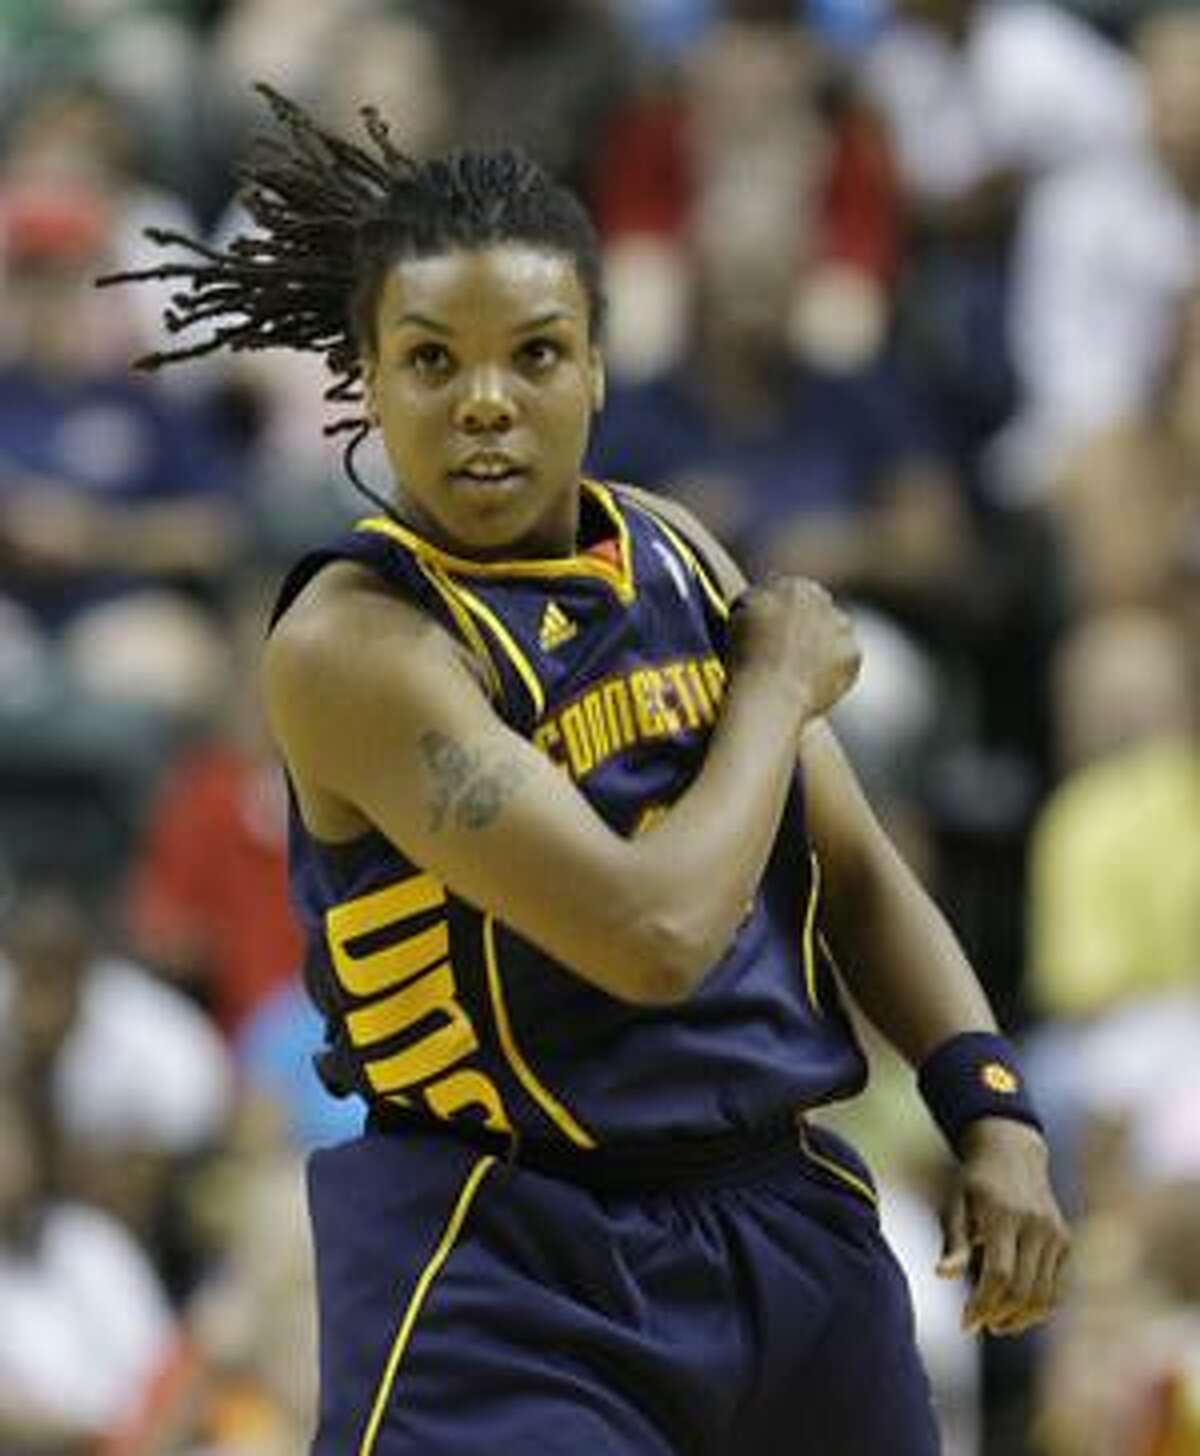 AP Connecticut Sun's Tan White reacts after hitting a shot during the fourth quarter of a game against the Indiana Fever in Indianapolis, Wednesday. Connecticut won 77-68.